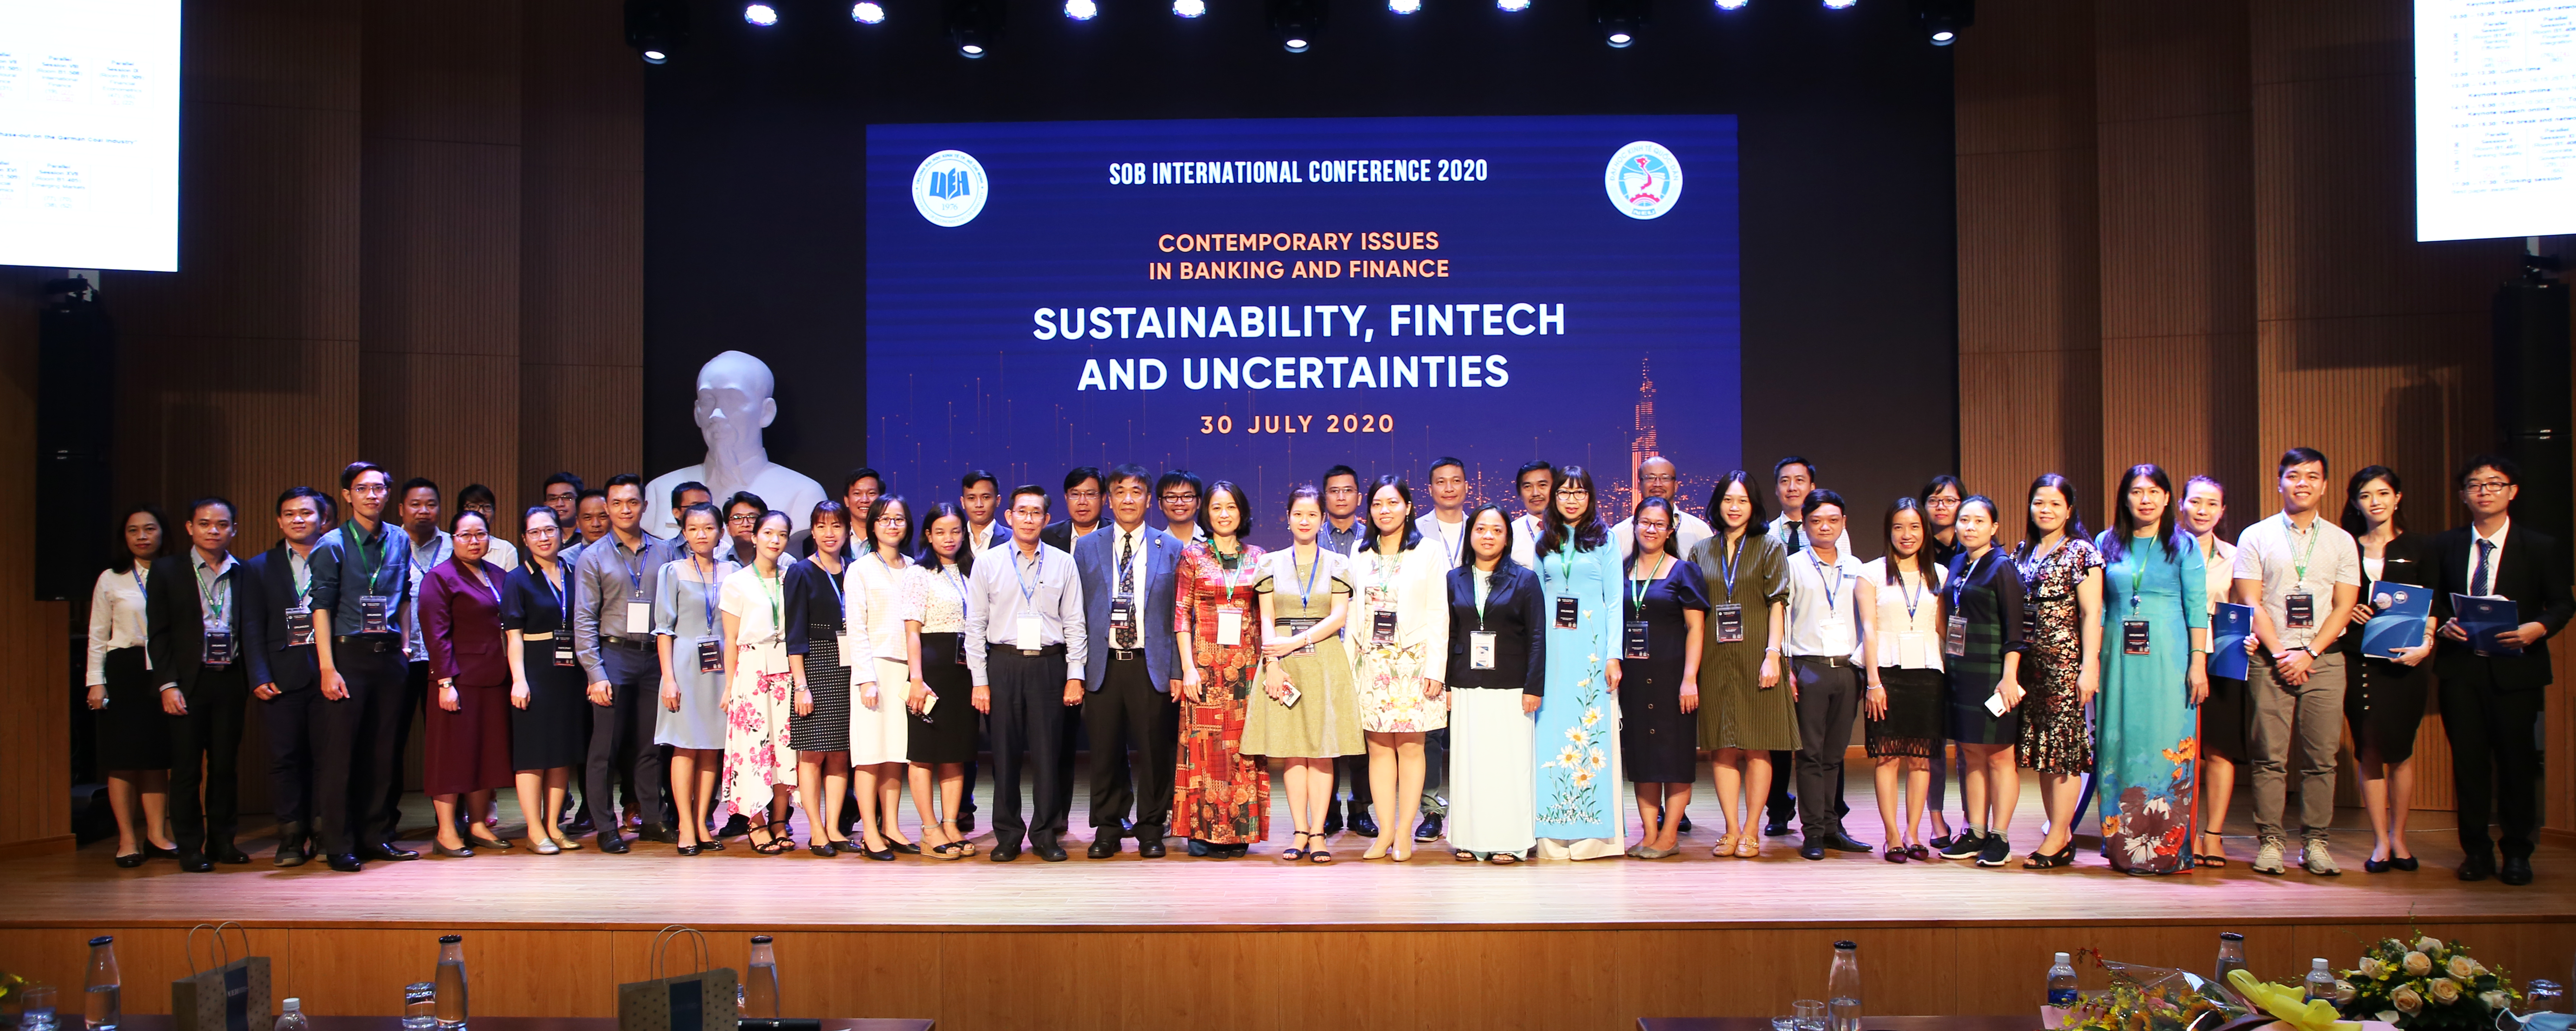 The International Seminar "Contemporary issues in banking and finance: Sustainability, fintech and uncertainties" was held for the first time at UEH (University of Economics Ho Chi Minh City)